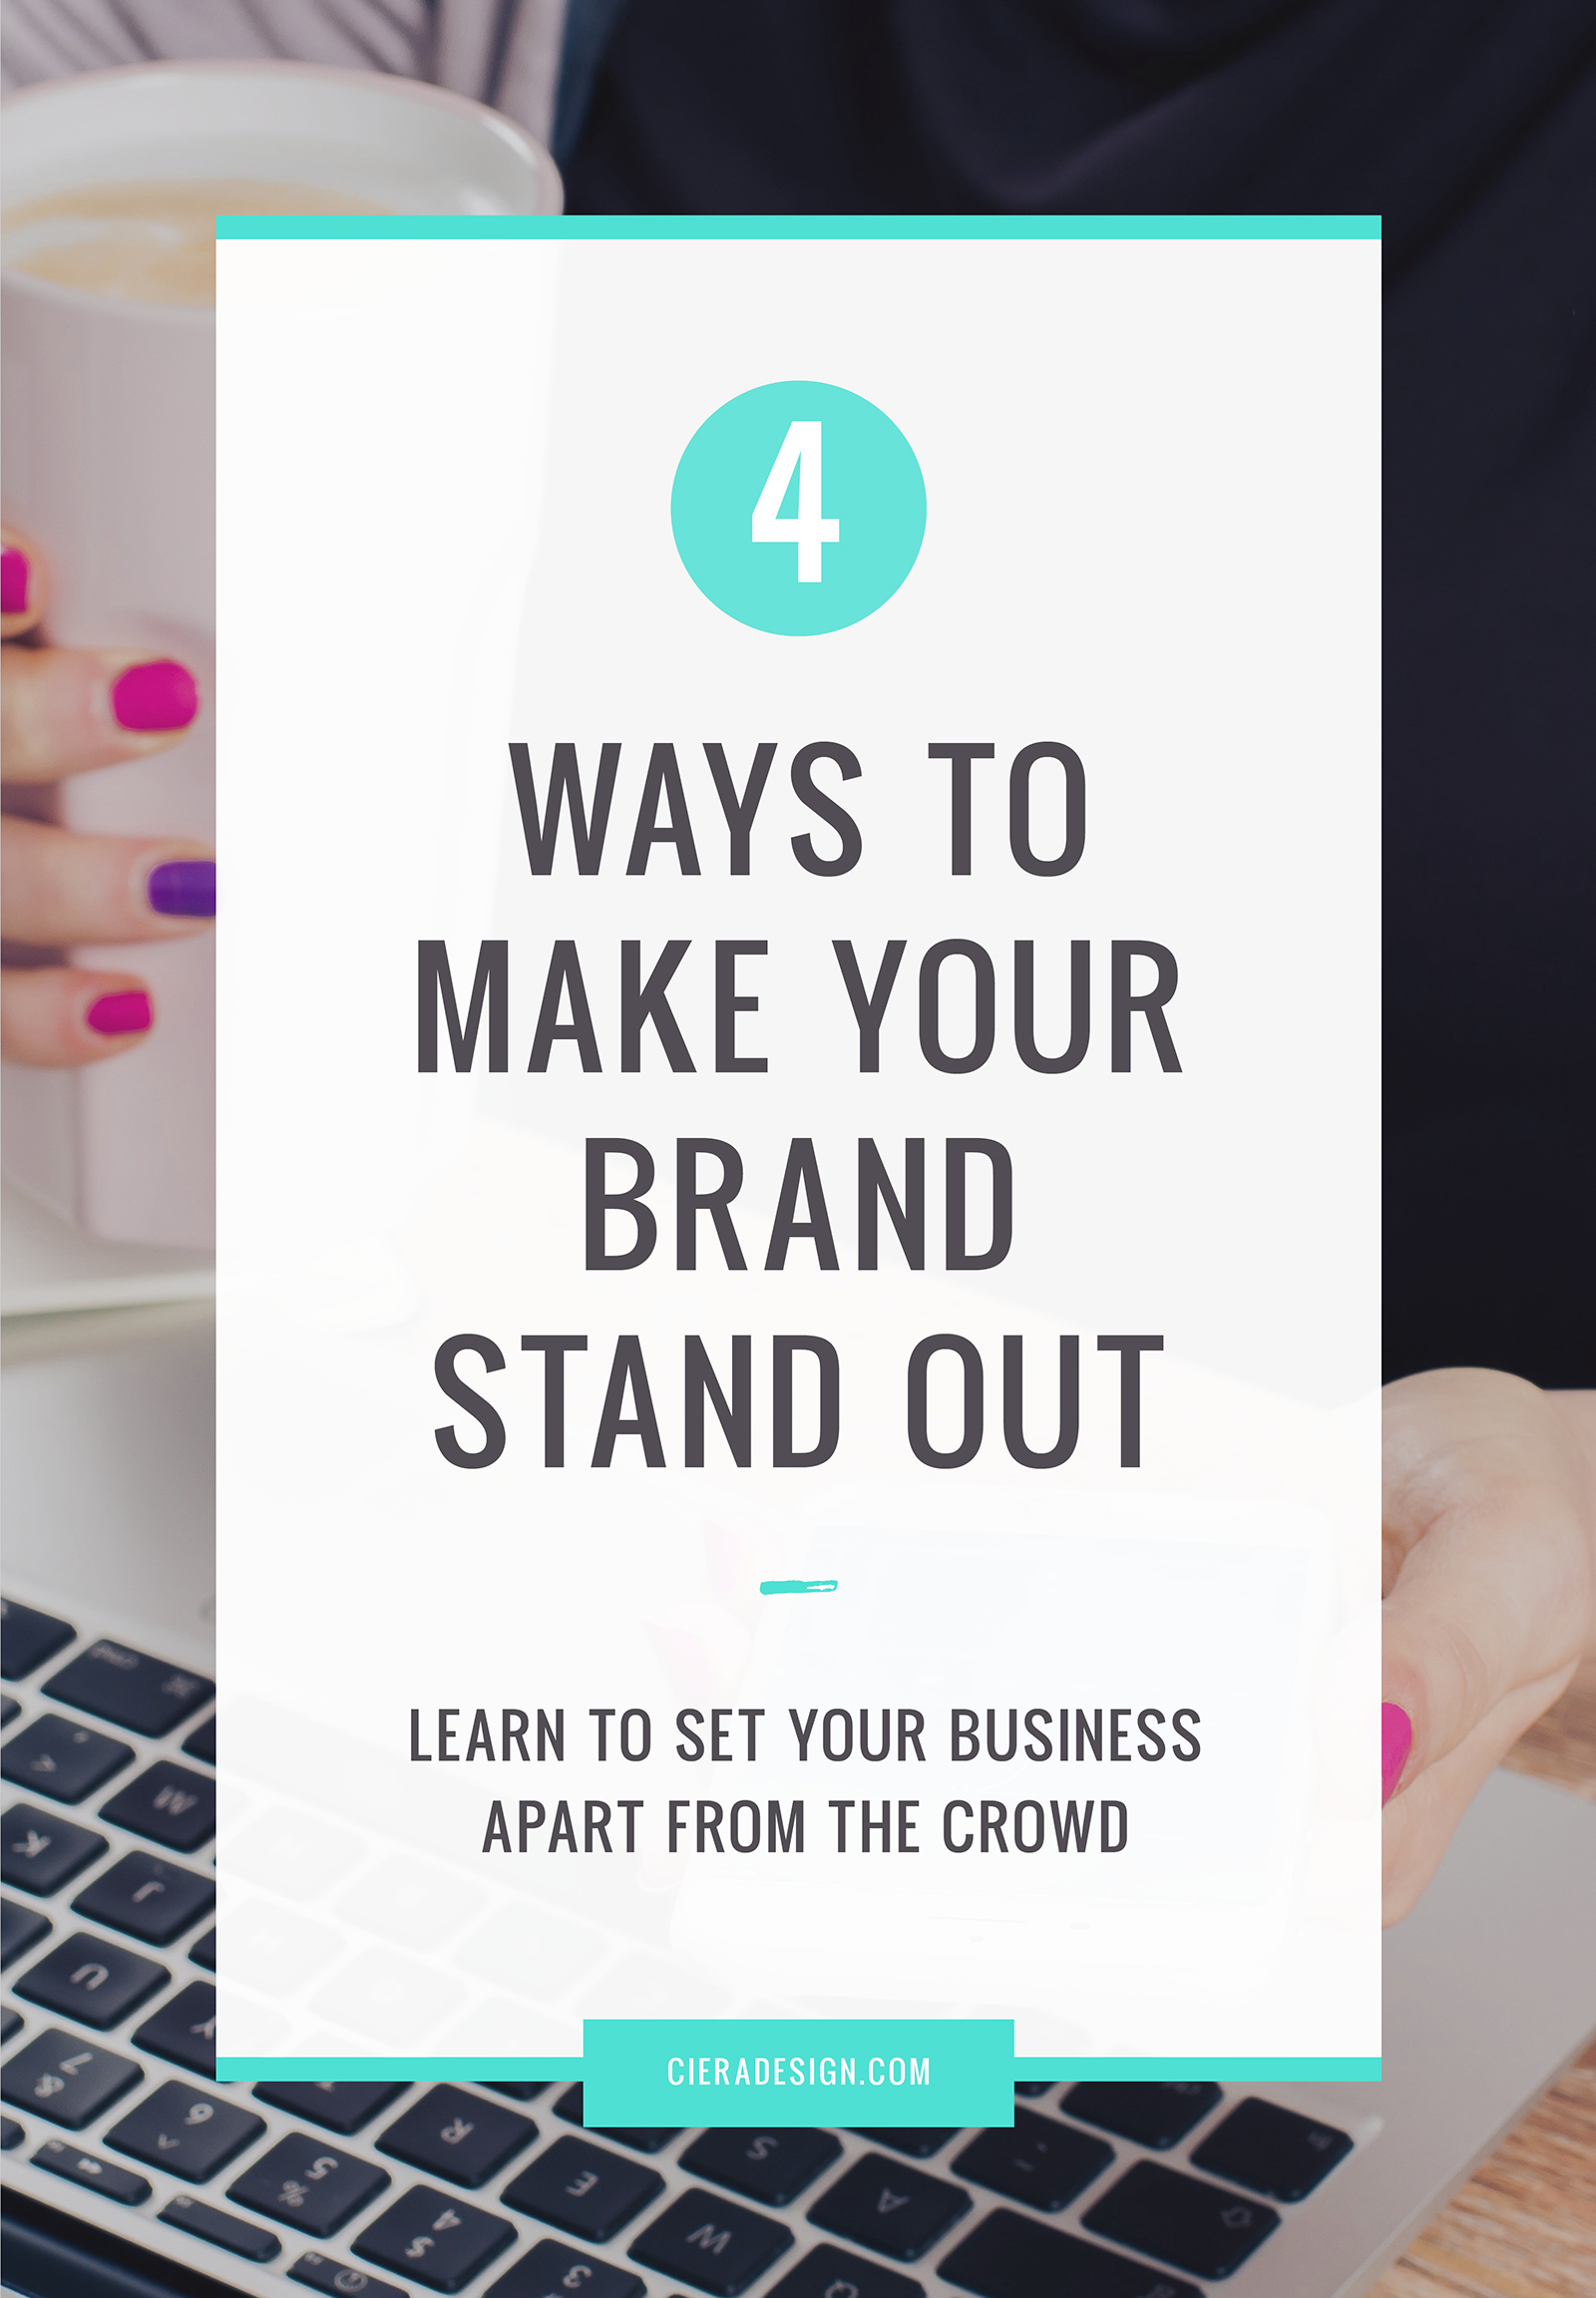 Click through to learn how to set your business apart from the crowd!